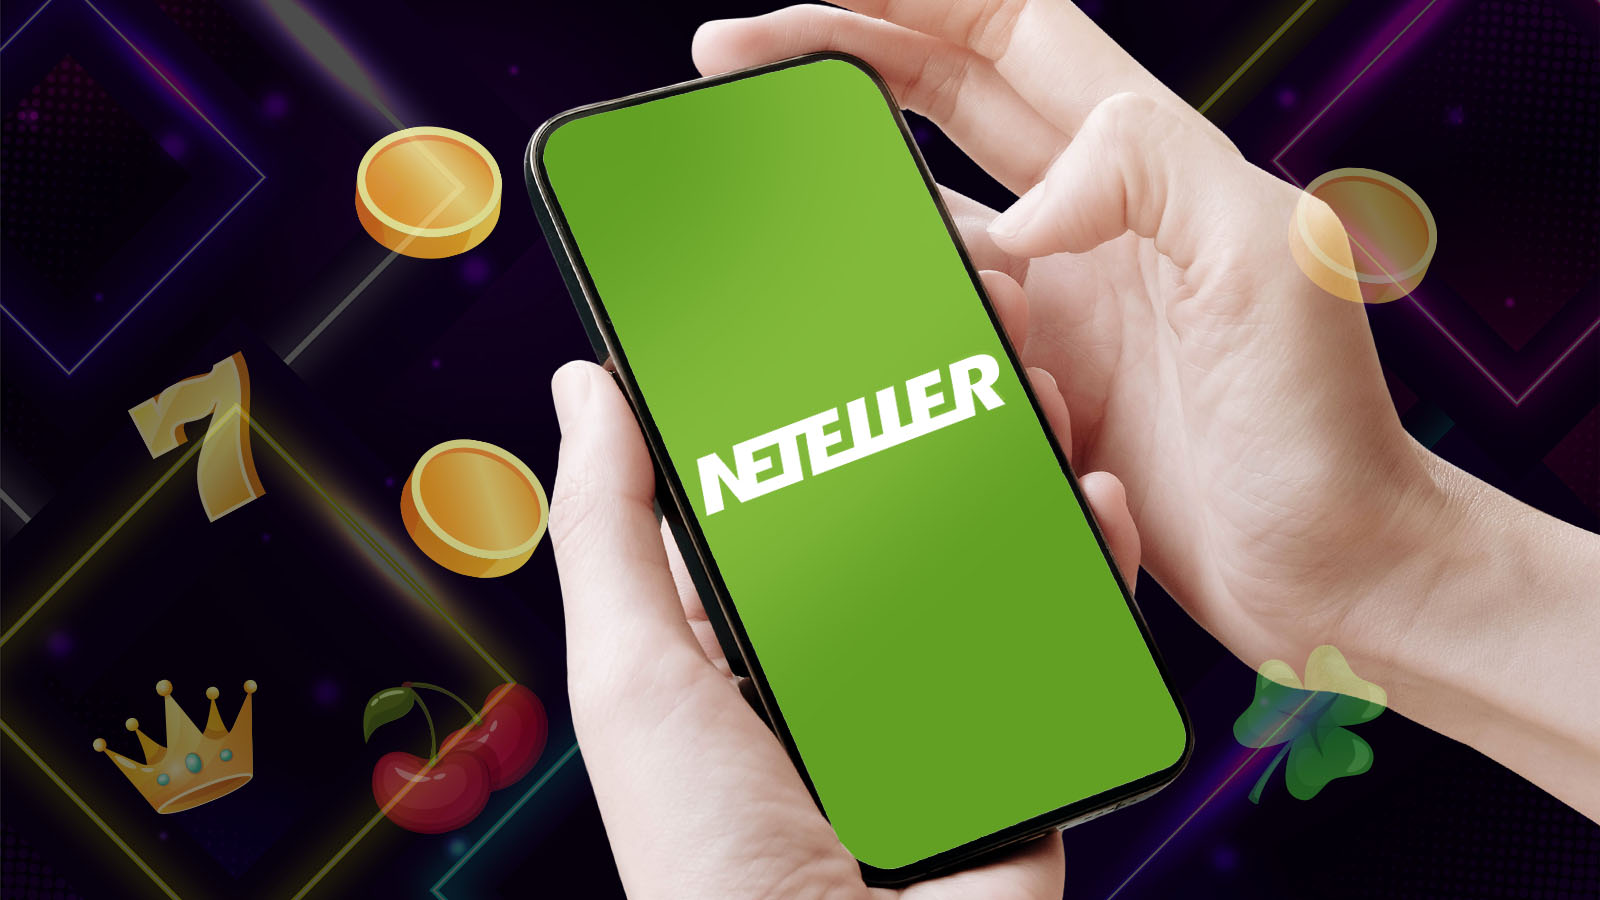 CasinoAlpha's Recommendation Pay by Neteller at Online Casinos